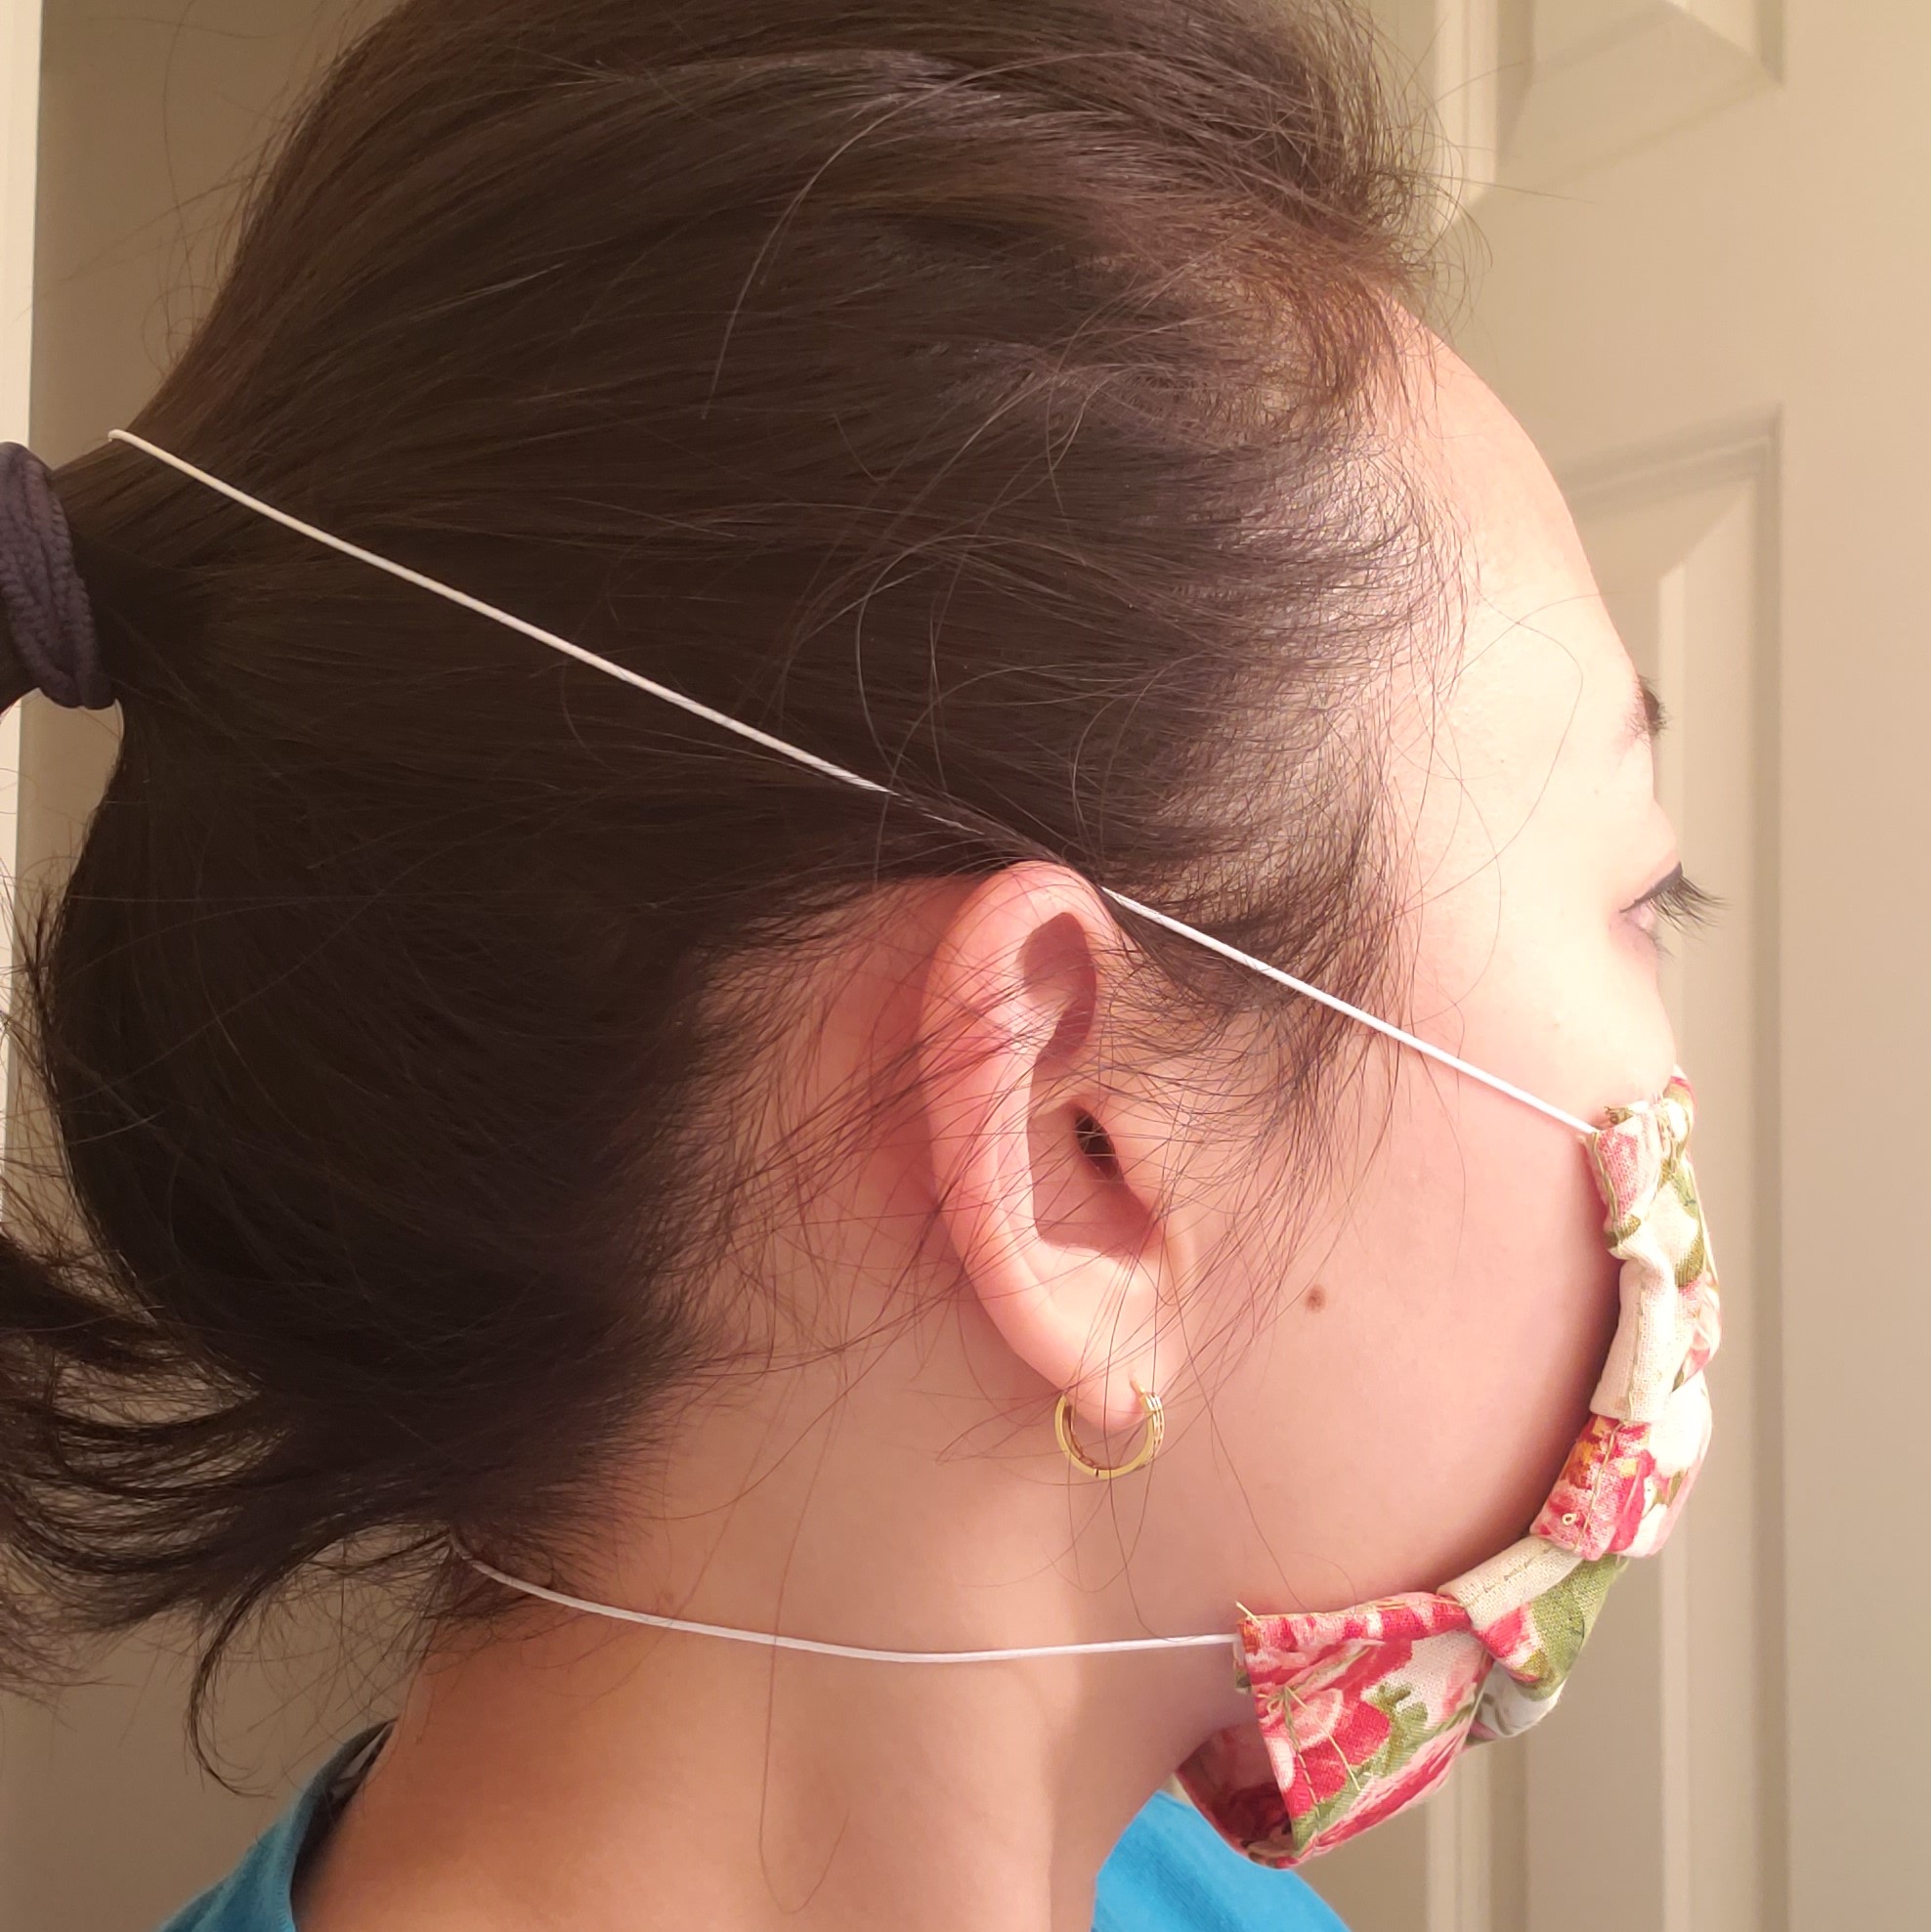 Cotton-Fabric mask with elastics strung to go over the user's head and neck, worn by a female model